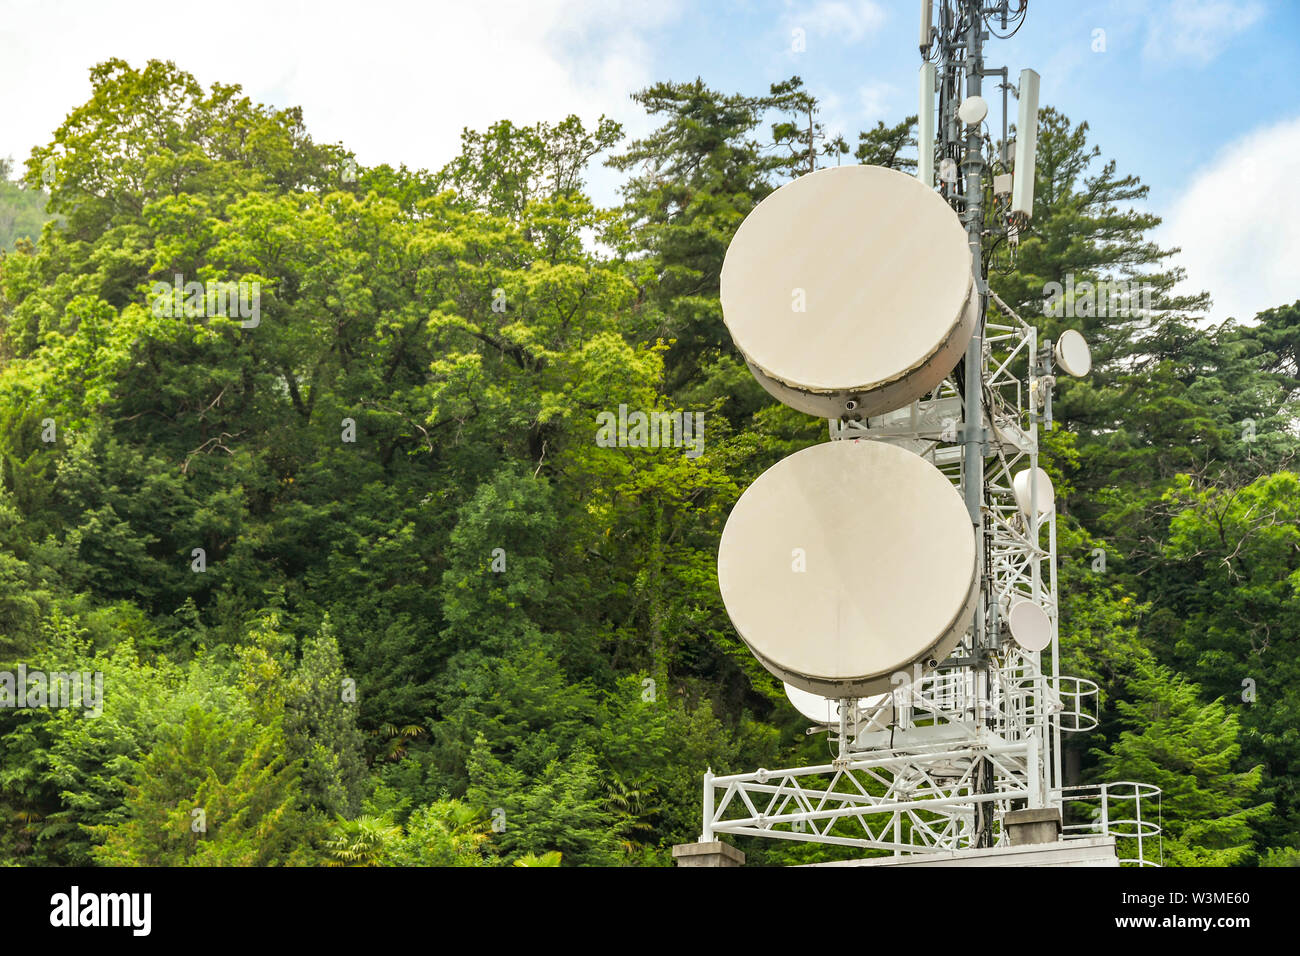 MENAGGIO, LAKE COMO, ITALY - JUNE 2019: Mobile phone communications mast and technology on top of a building in Menaggio on Lake Como Stock Photo